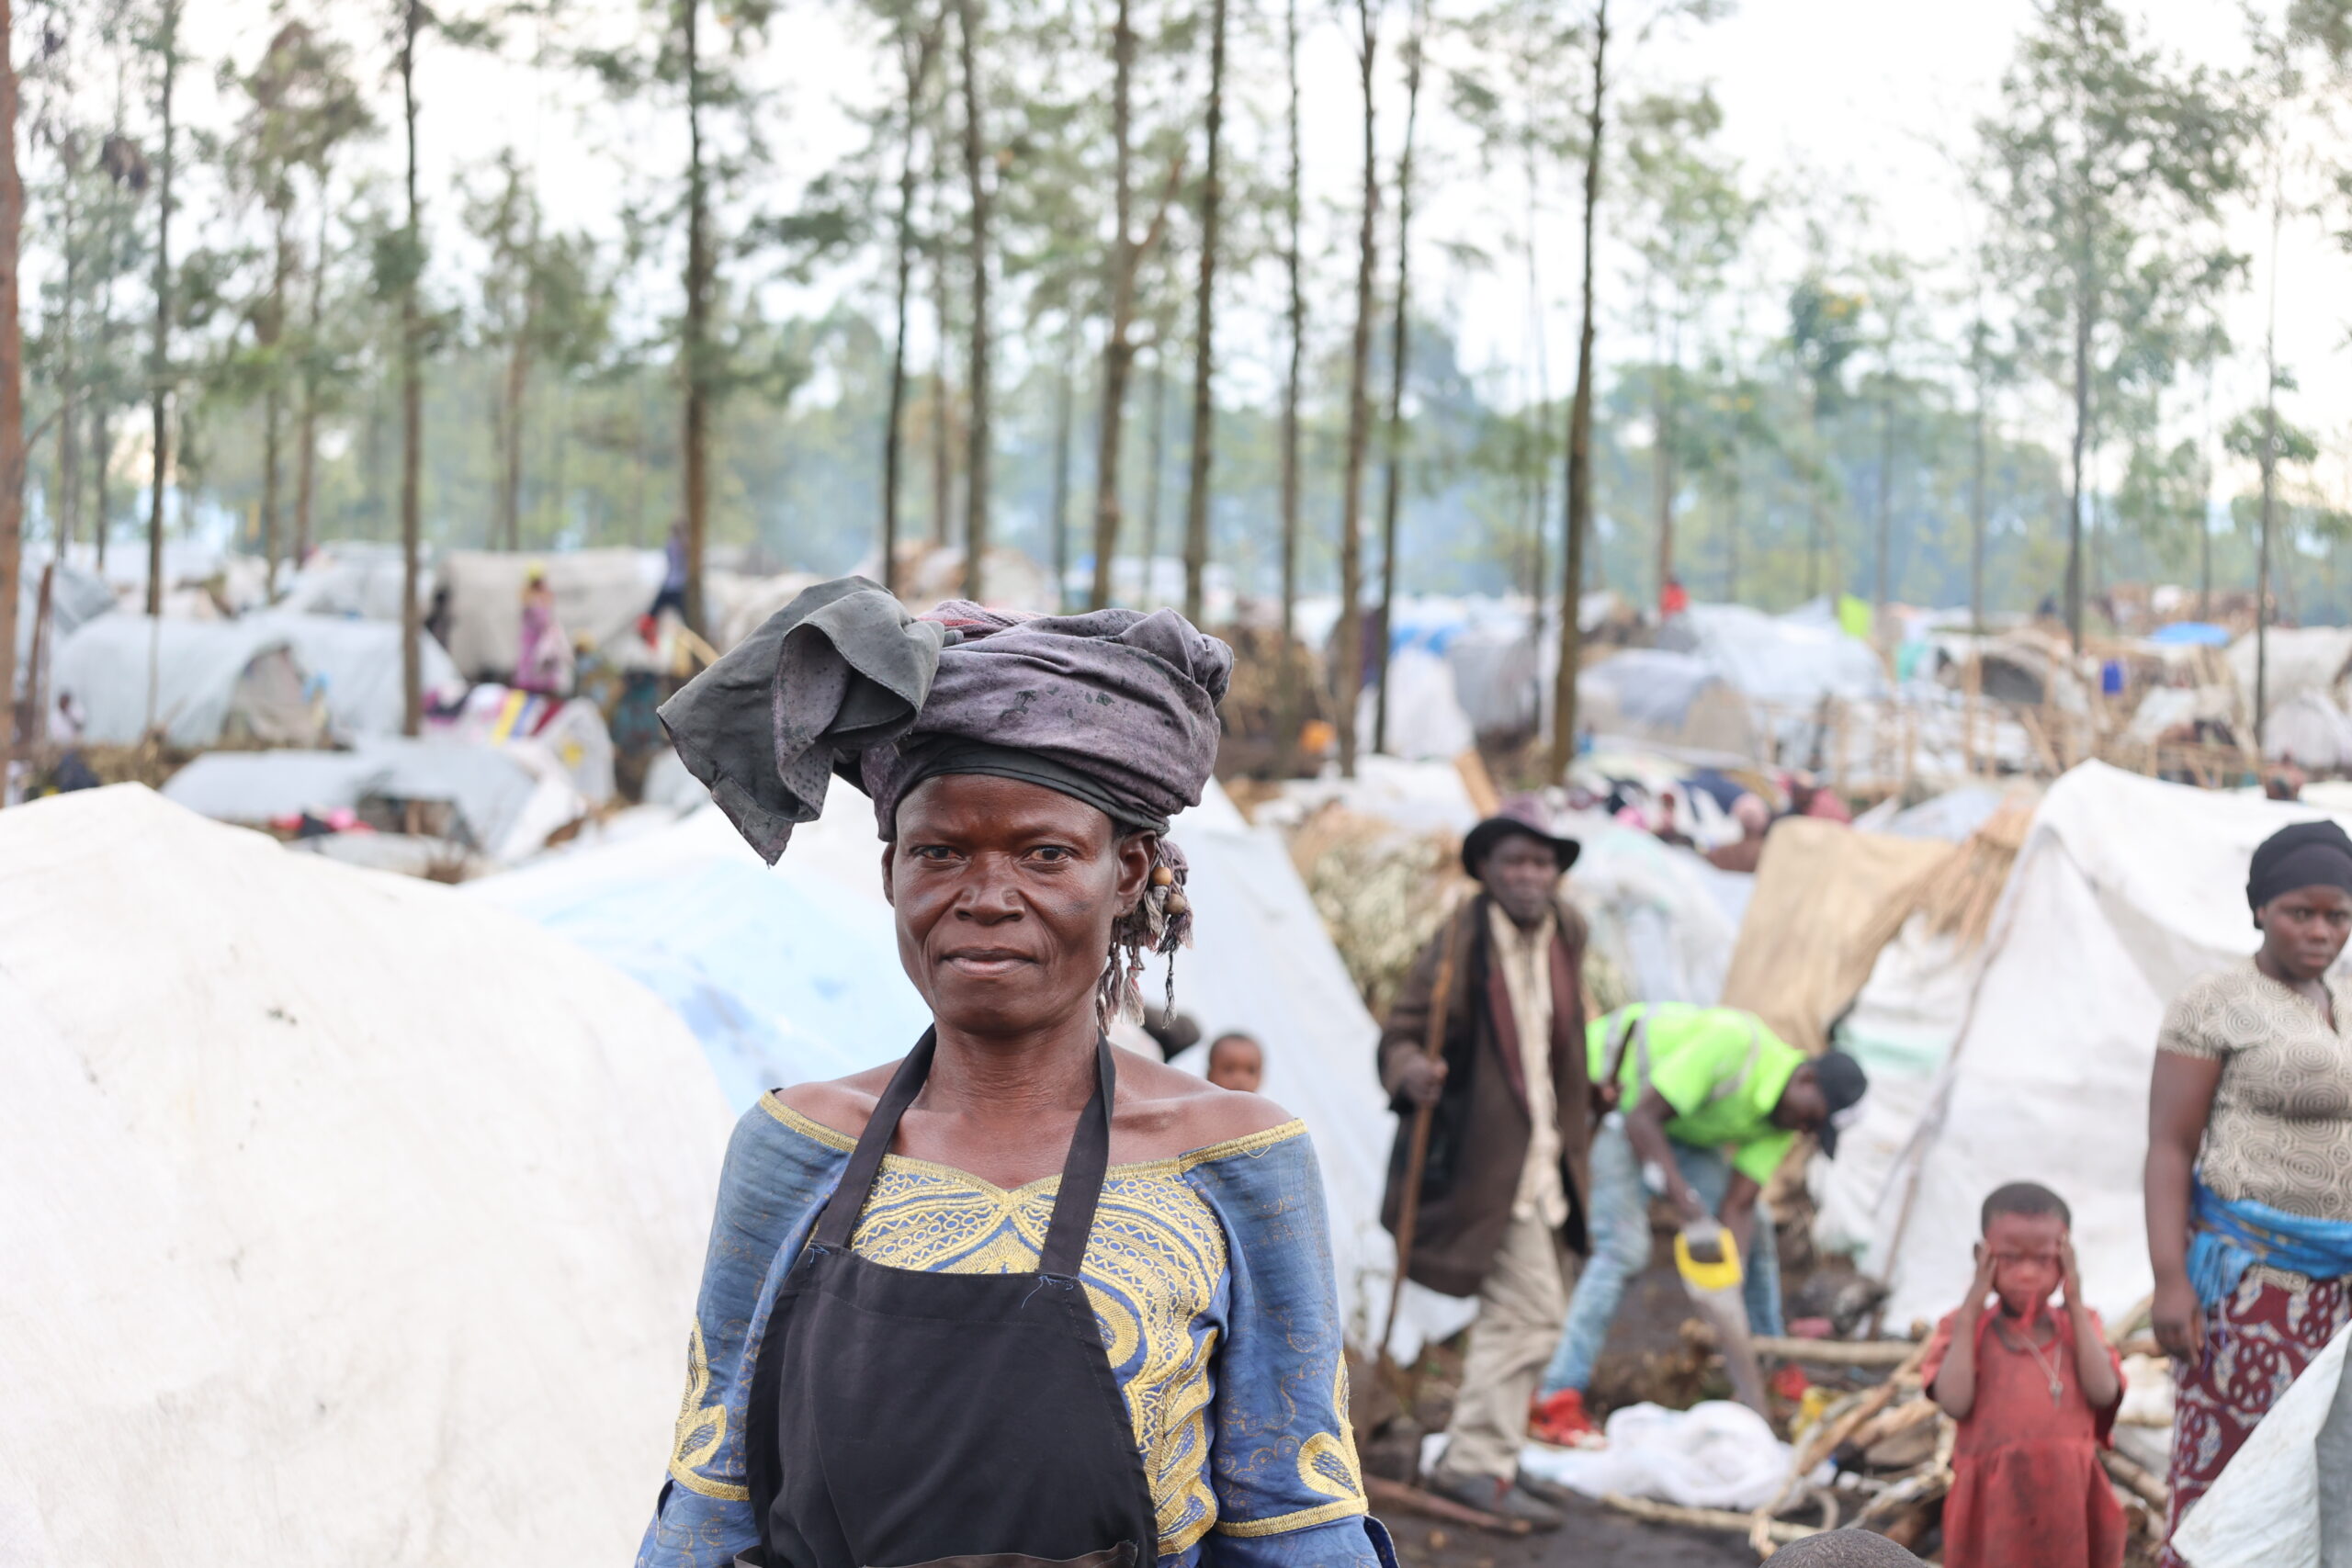 Un des nombreux sites pour personnes déplacées qui ont vu le jour au Nord-Kivu, où 1,2 million de personnes ont été forcées de fuir leurs foyers depuis mars 2022. © HCR/Blaise Sanyila From Kitshanga to Goma, she has traveled more than 150 km with the help of host families in the villages. Having lost track of her family, Machozi only asks for one thing, peace. ; Fighting between the FARDC and the M23 has caused more than 117,000 people to flee the Masisi territory in less than a week. Most of the displaced are women and children. Fleeing from northern, western and southern Kitshanga, they are taking refuge in host families as well as in warehouses, schools and churches. Other desperate people are settling in spontaneous sites and facing all possible risks. Many are also sleeping in the open and are exposed to the weather. At least 5,000 people, who had already fled to Kitshanga after the January 19 violence in Mweso and Pinga, are being displaced for a second time. As the M23 continues to gain ground, UNHCR protection monitors report a desperate need for food, shelter, and essential household items. As the conflict continues, humanitarian access is becoming increasingly precarious. Un des nombreux sites pour personnes déplacées qui ont vu le jour au Nord-Kivu, où 1,2 million de personnes ont été forcées de fuir leurs foyers depuis mars 2022. © HCR/Blaise Sanyila